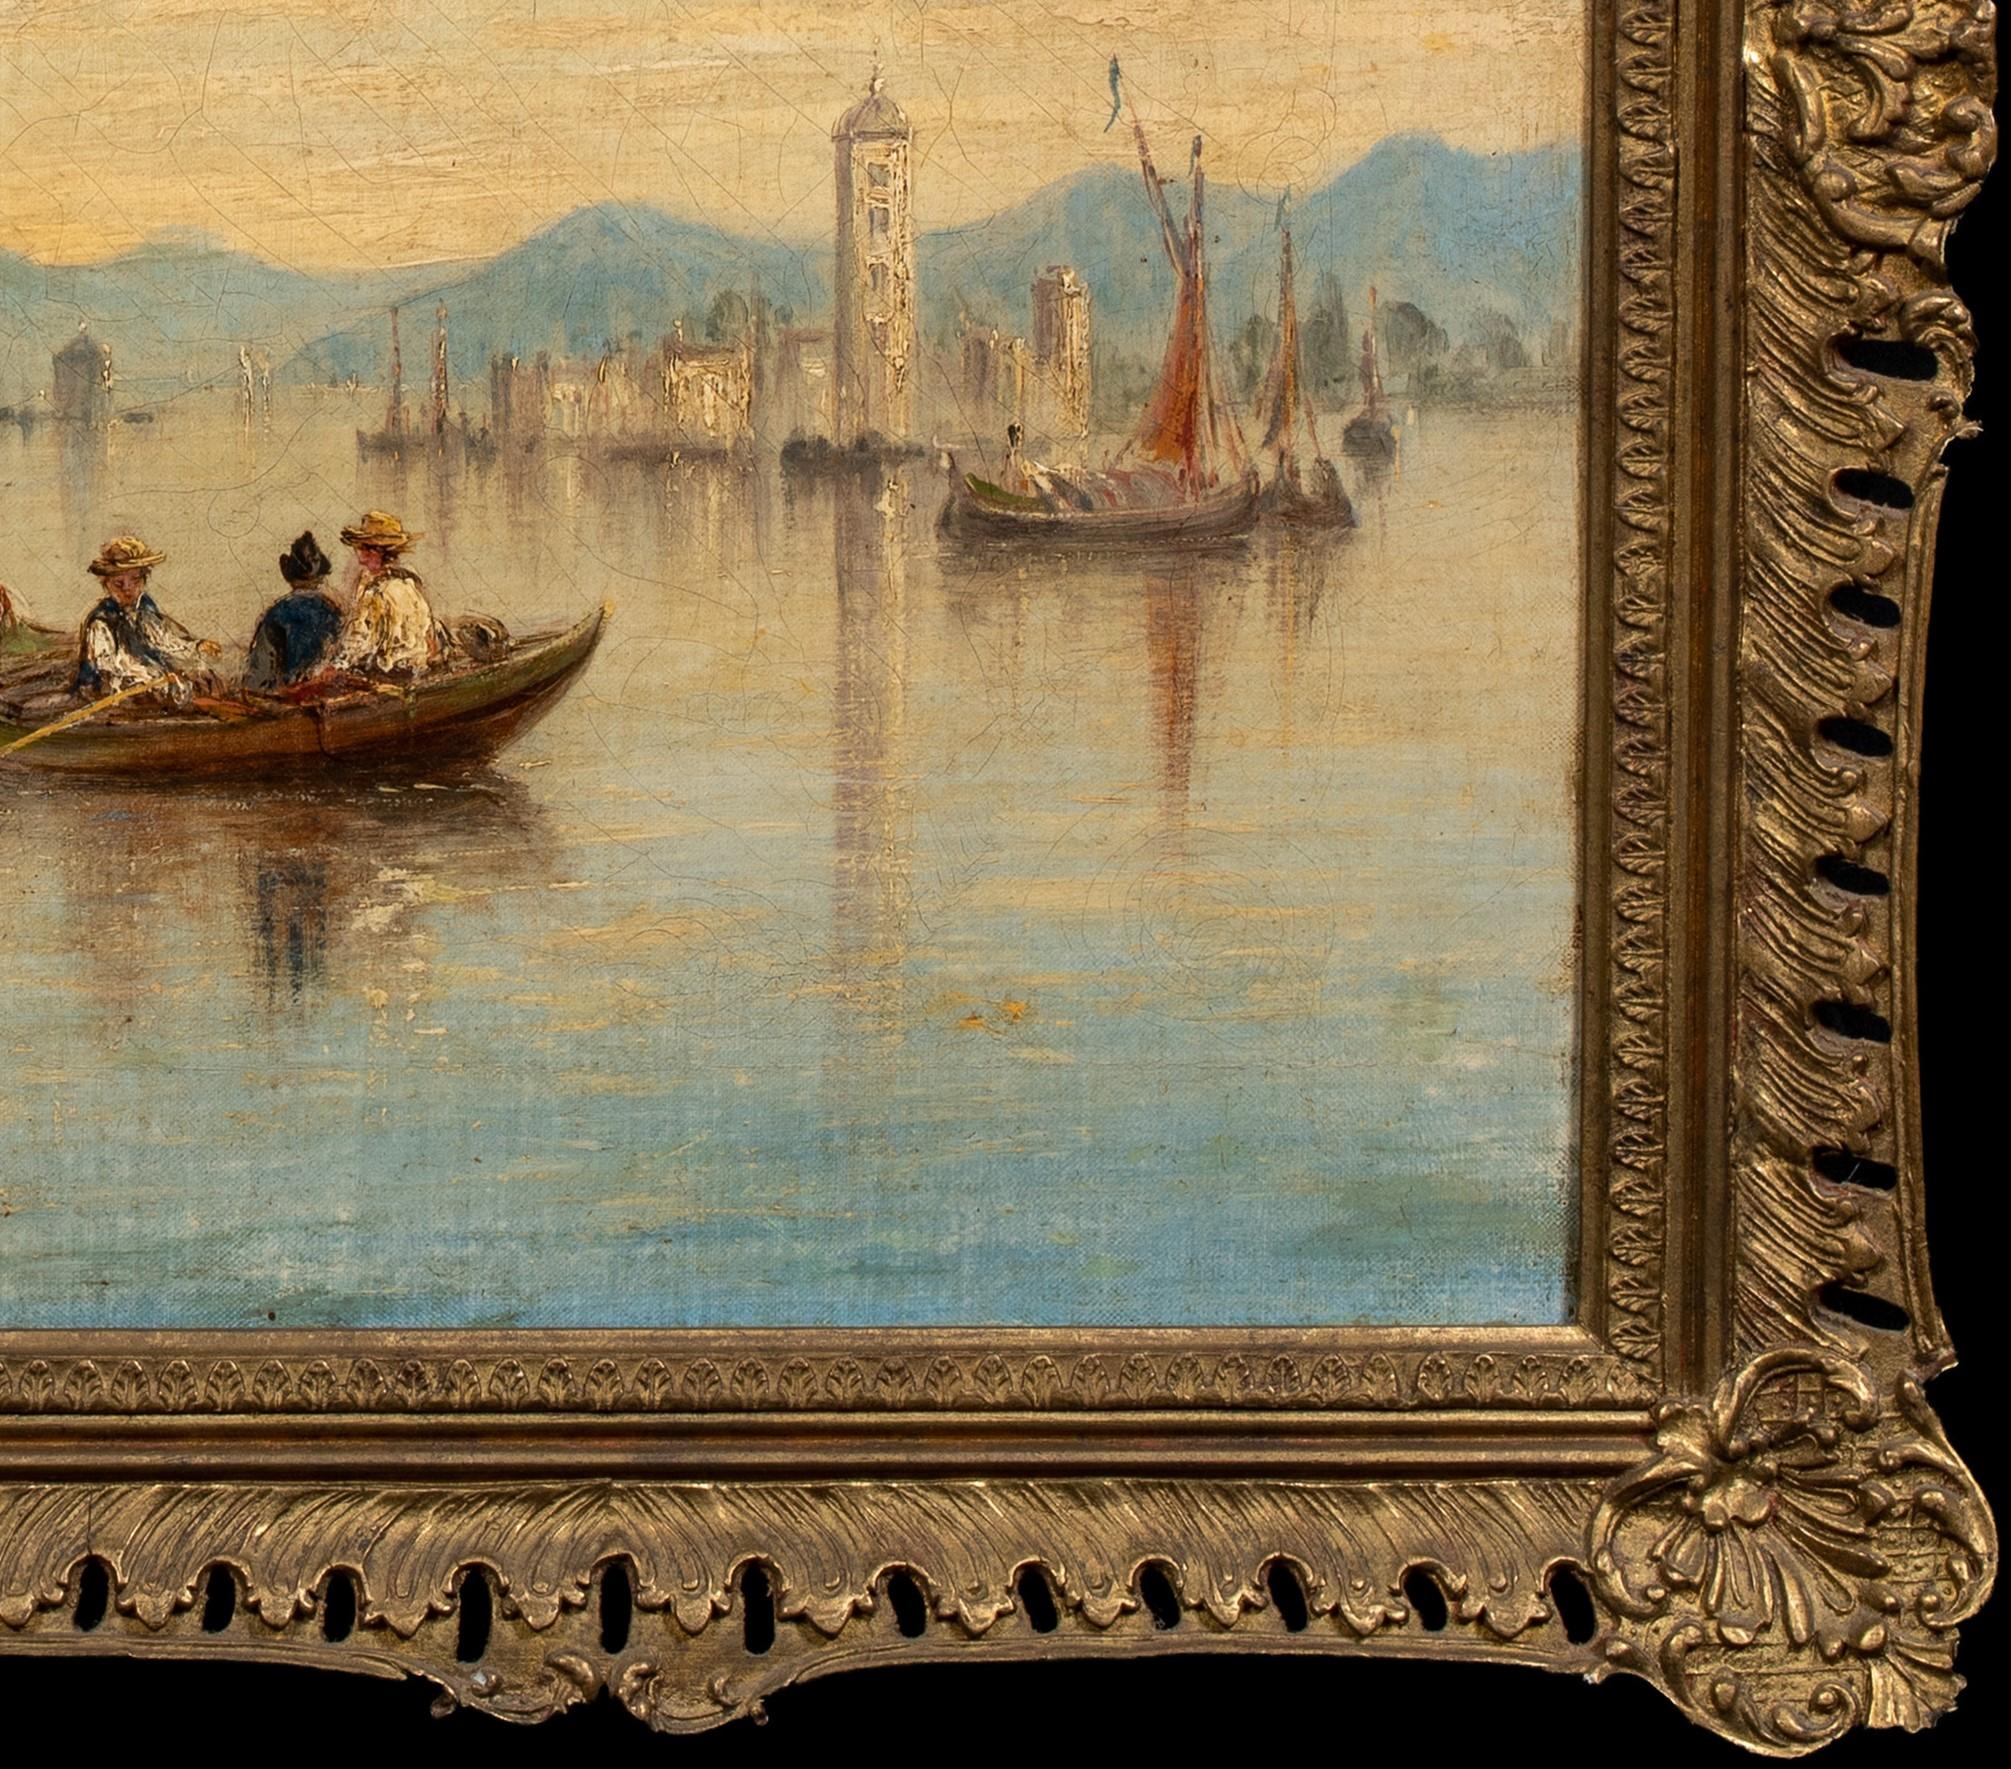 View Of Venice, 19th century

by JAMES SALT (1850-1906)

Large 19th century view of Venice, oil on canvas by James Salt. Excellent large scale panoramic view of gondolas off the waters of venice. Superb detail and condition. Presented in a gilt